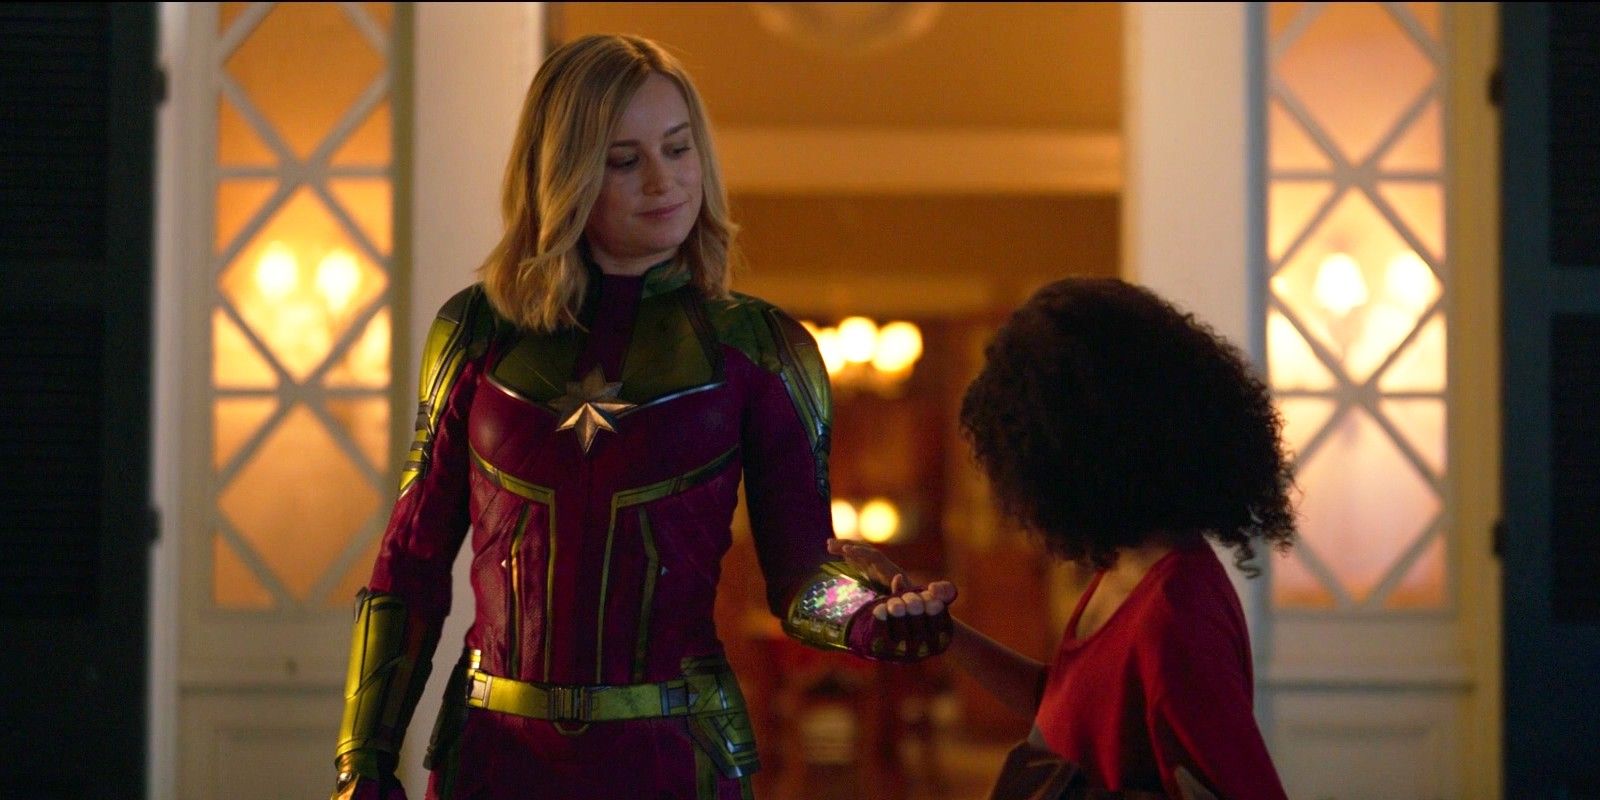 Captain Marvel Script Was Constantly Changing While Filming, Says Director